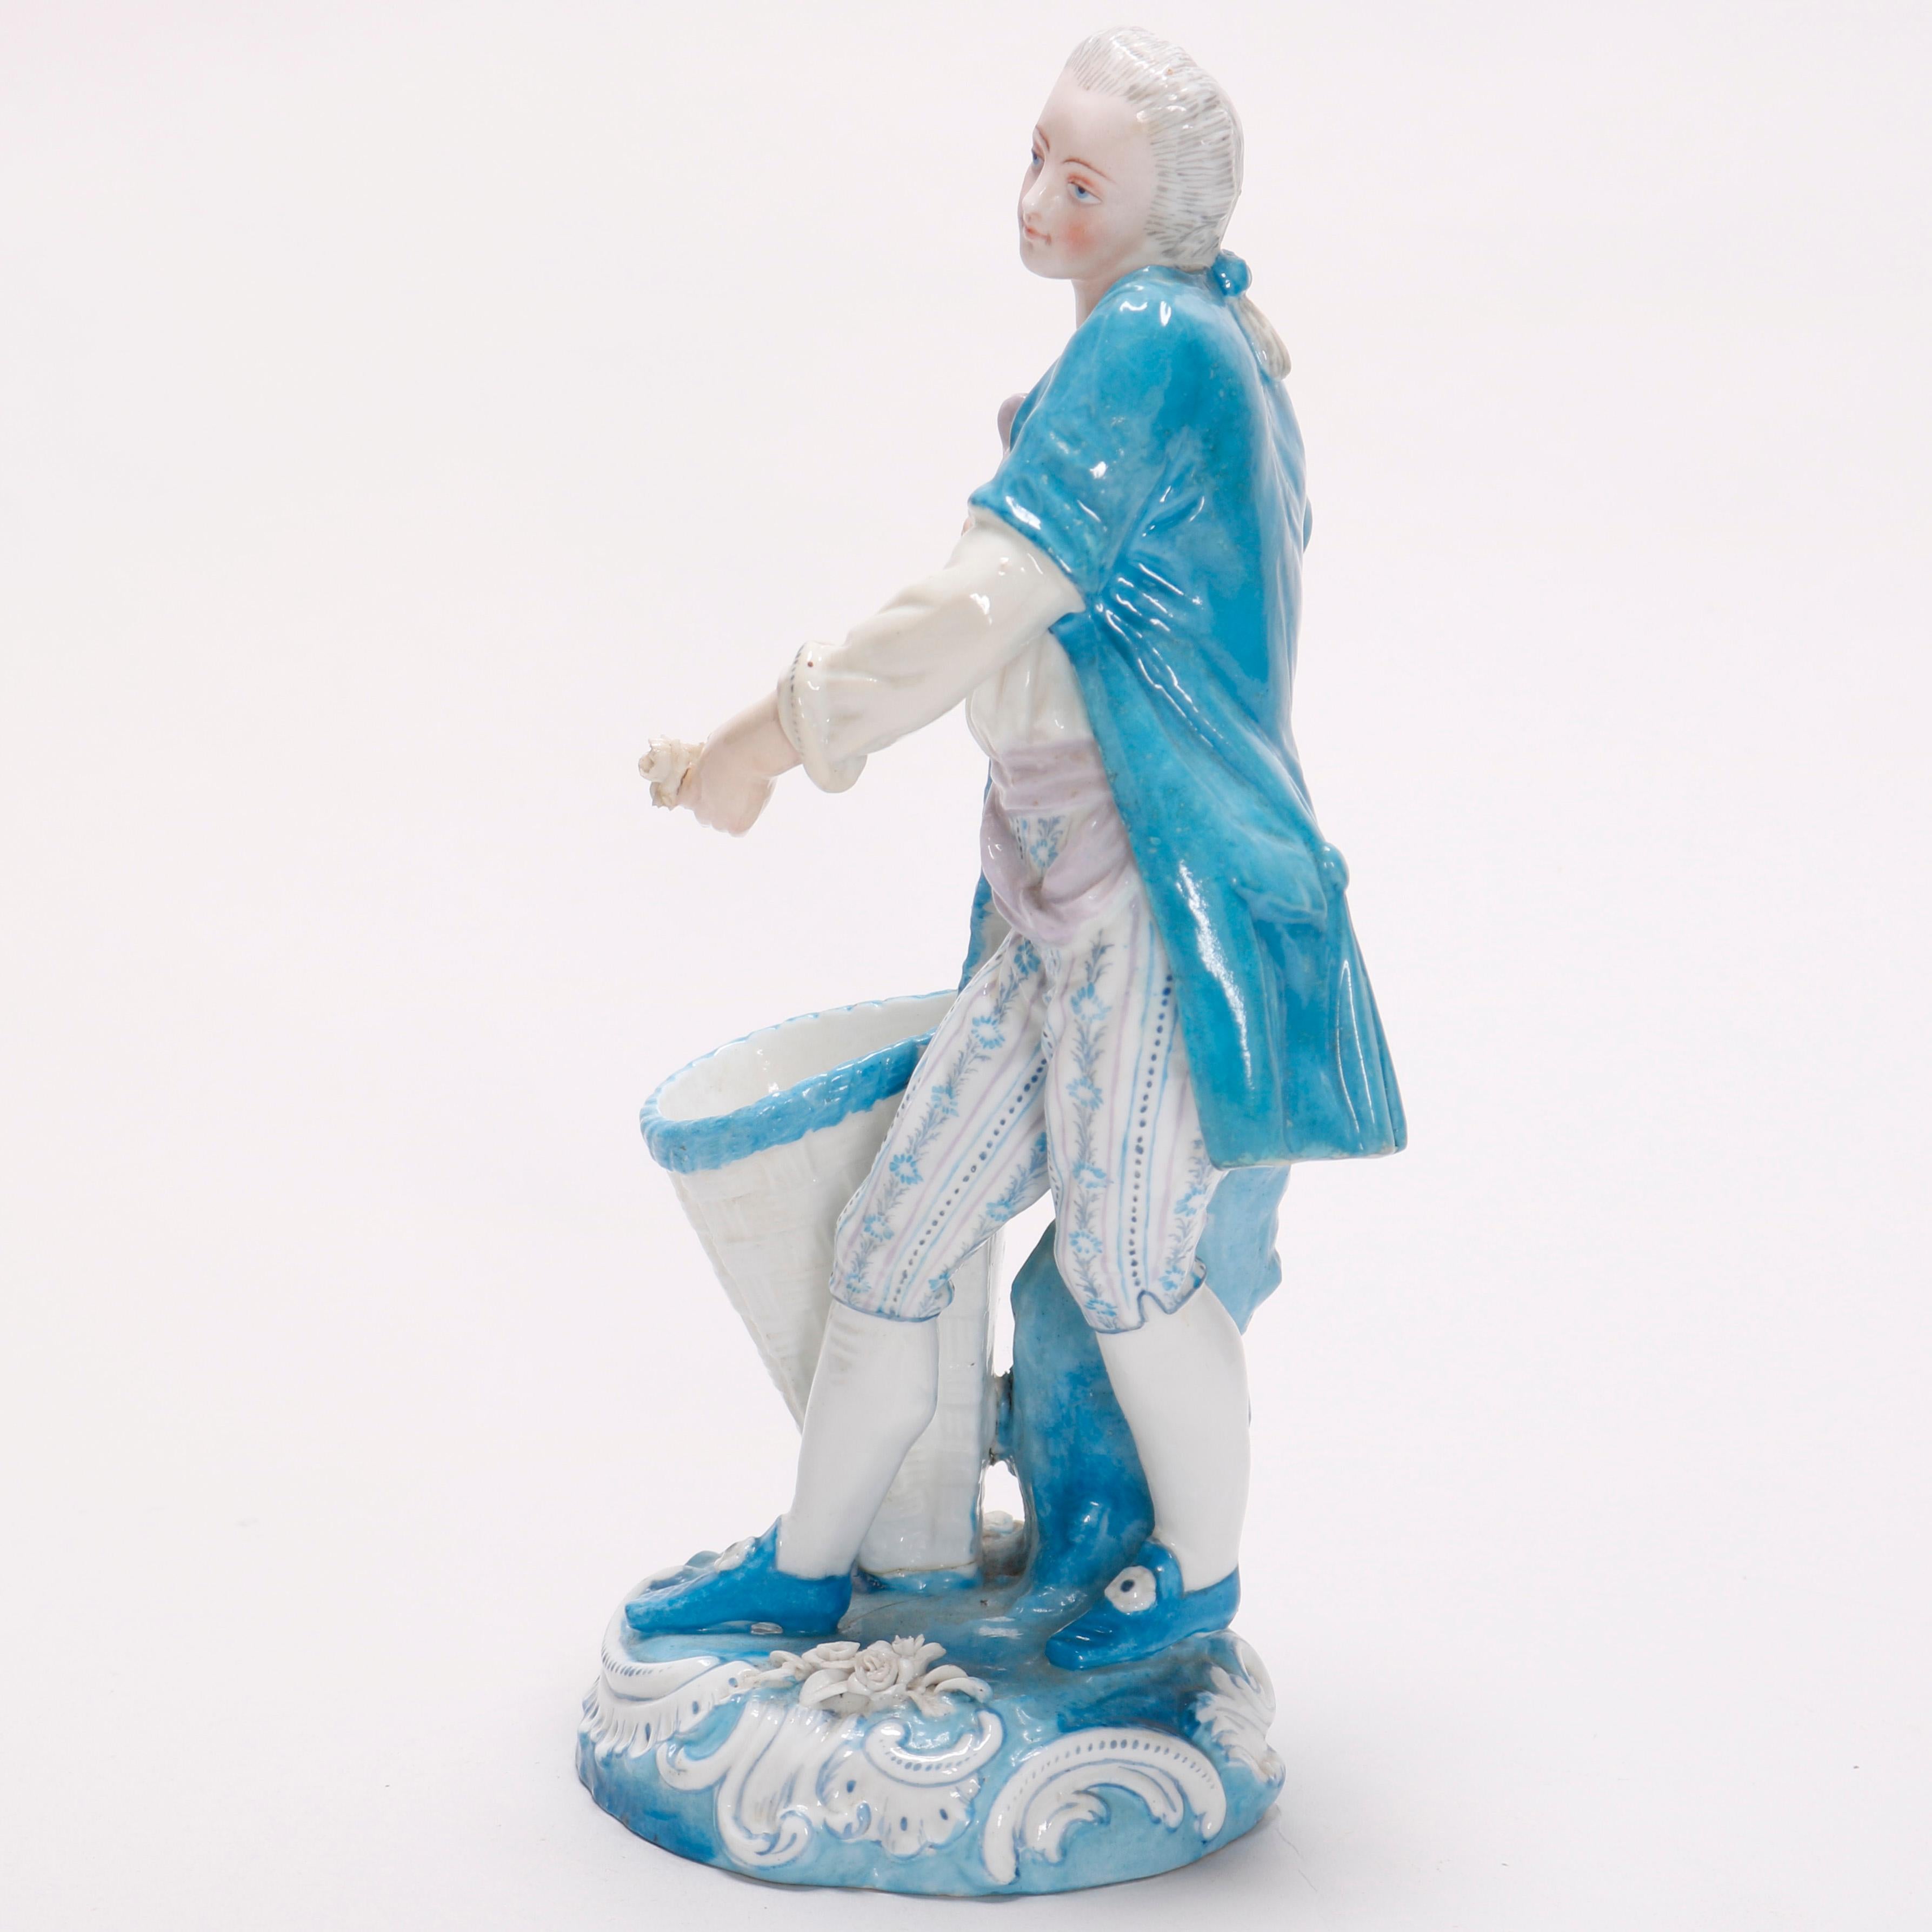 An antique German figural spill vase by KPM offers porcelain construction with figure of man in countryside setting, hand painted with gilt highlights, marked on base as photographed, 19th century

Measures: 9